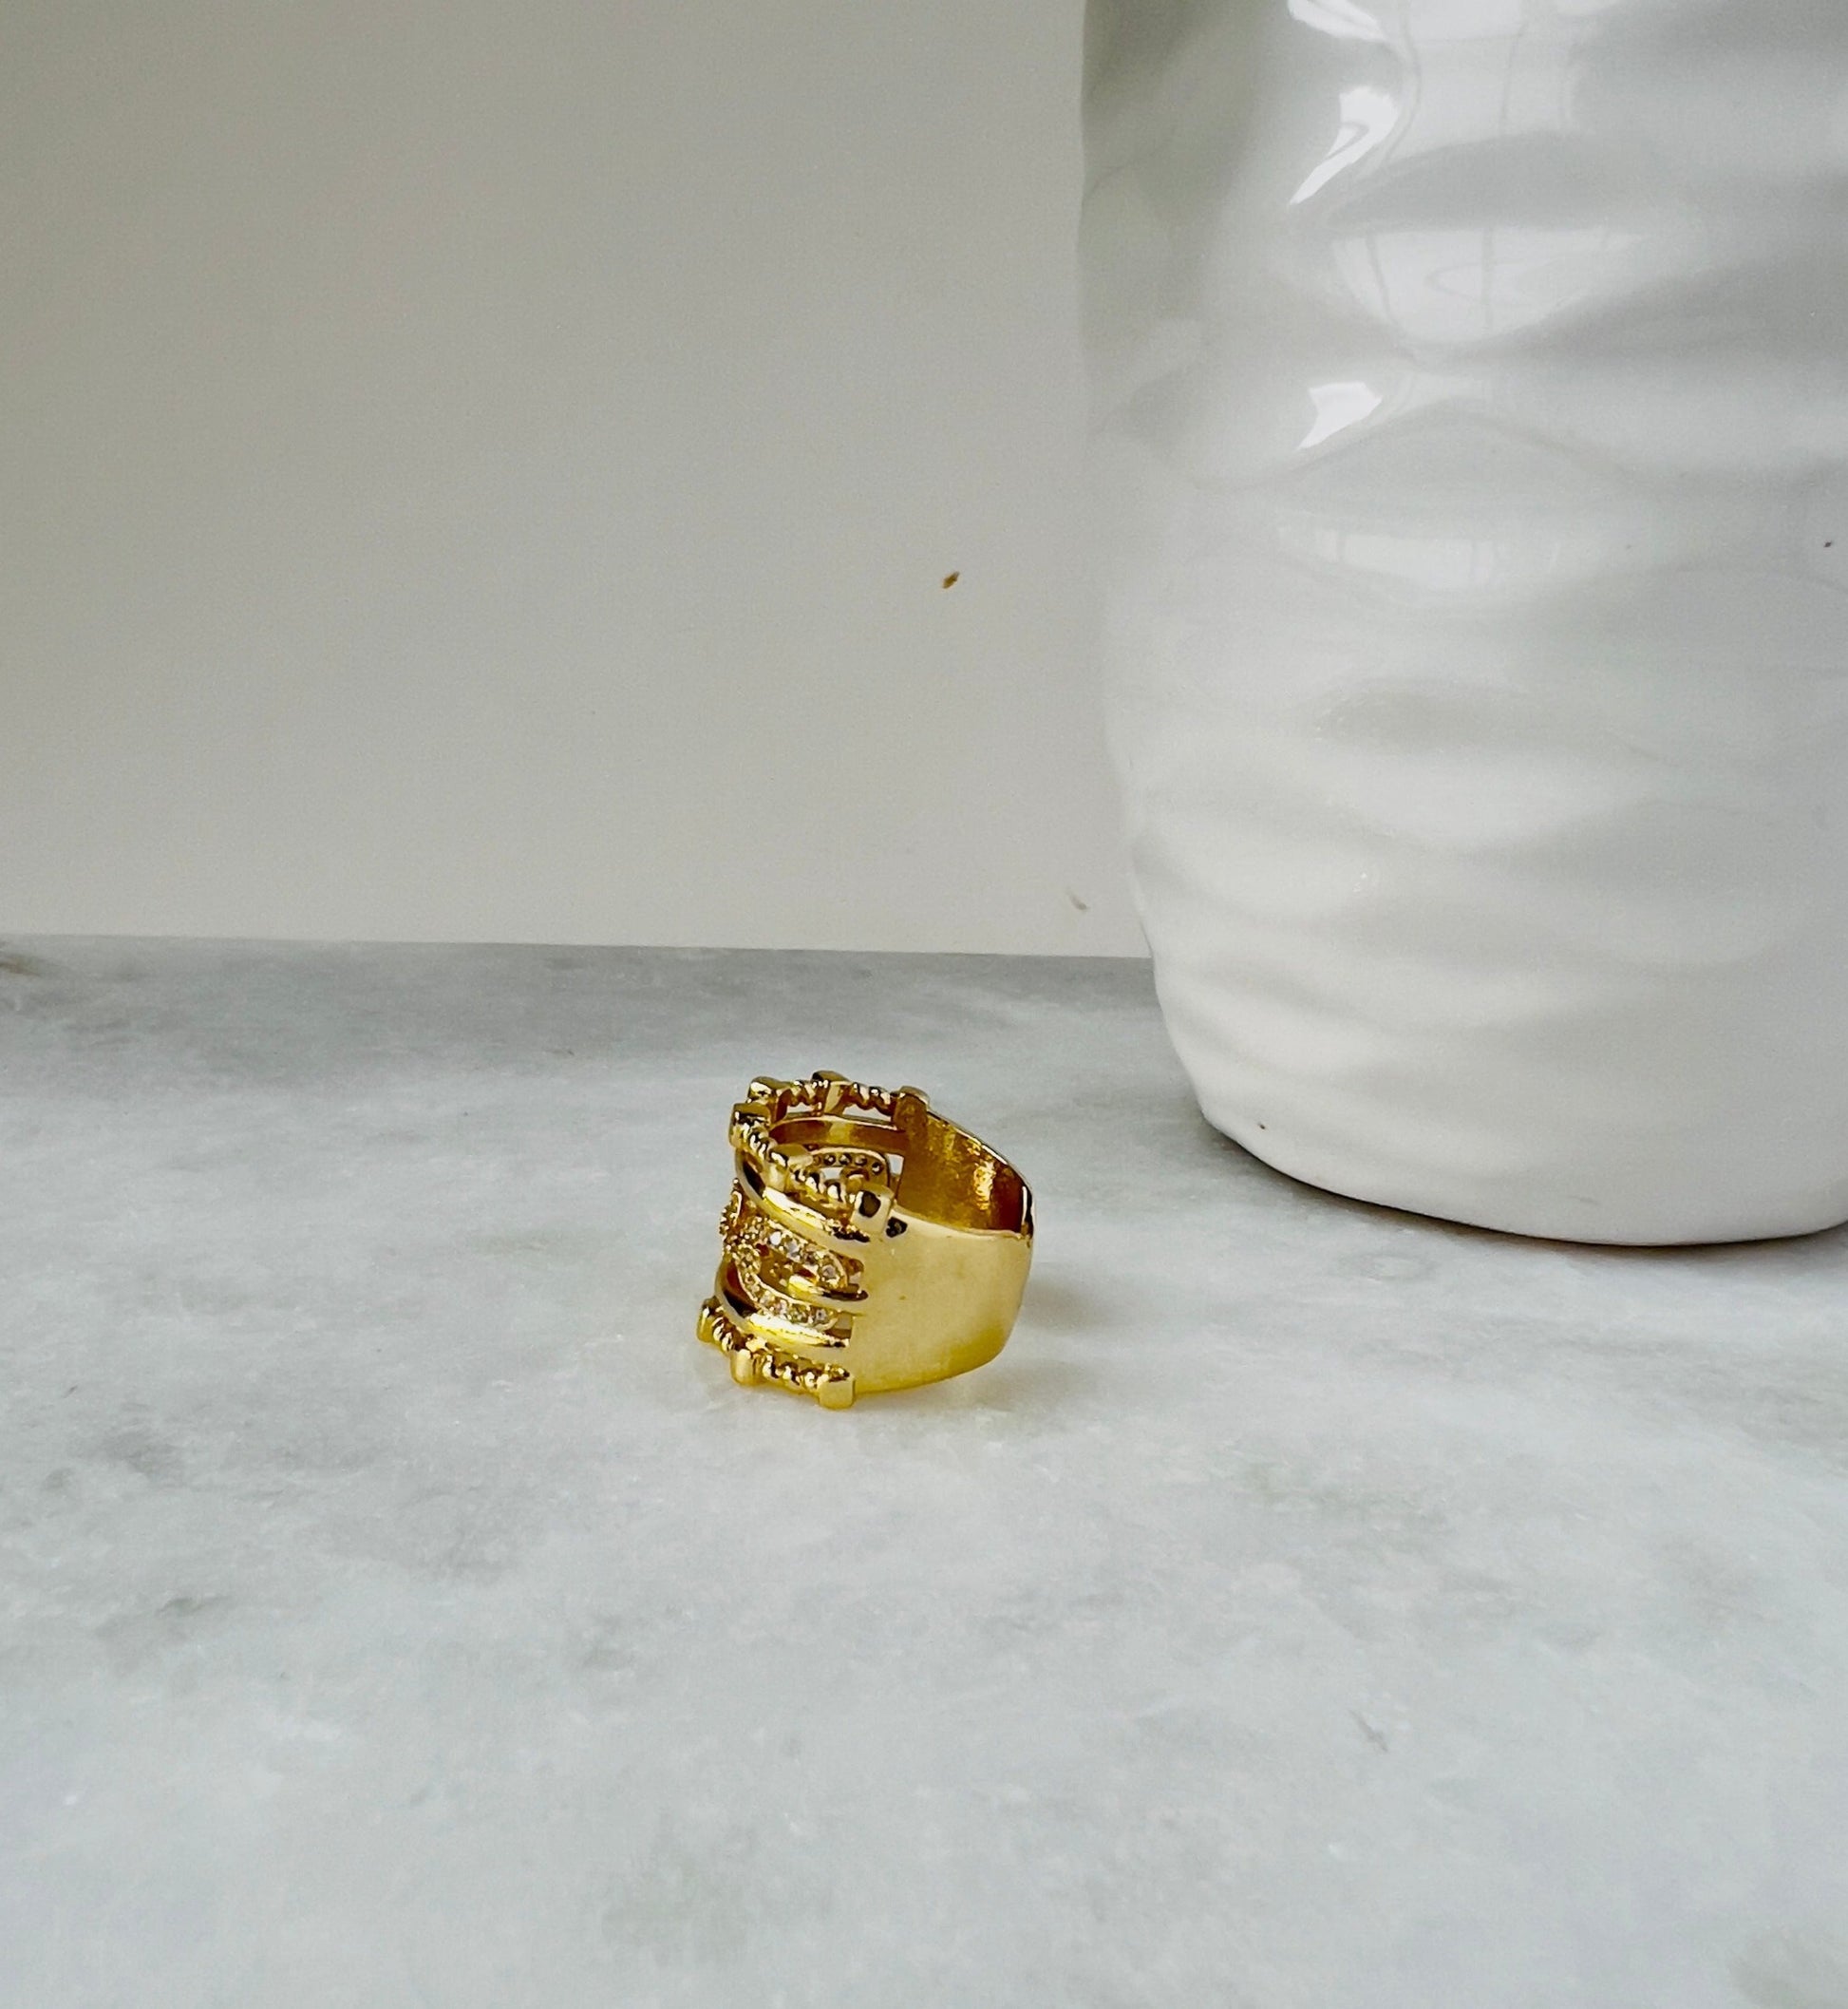 gold plated chunky ring in crown shape perfect for birthday gifts and special night outs